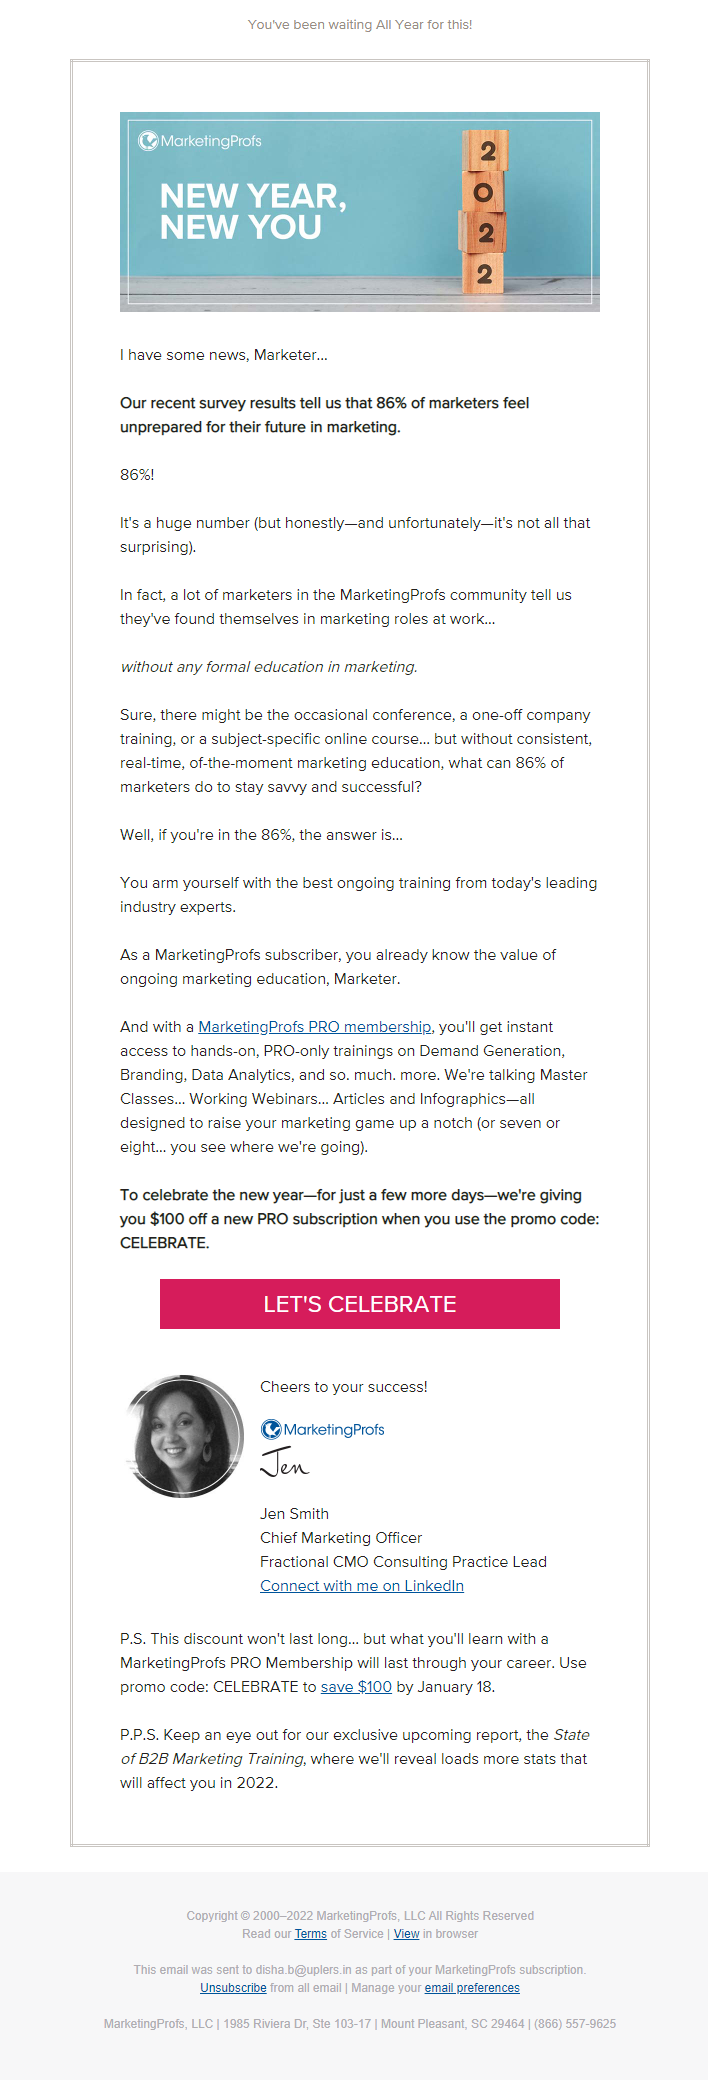 Promotional email template